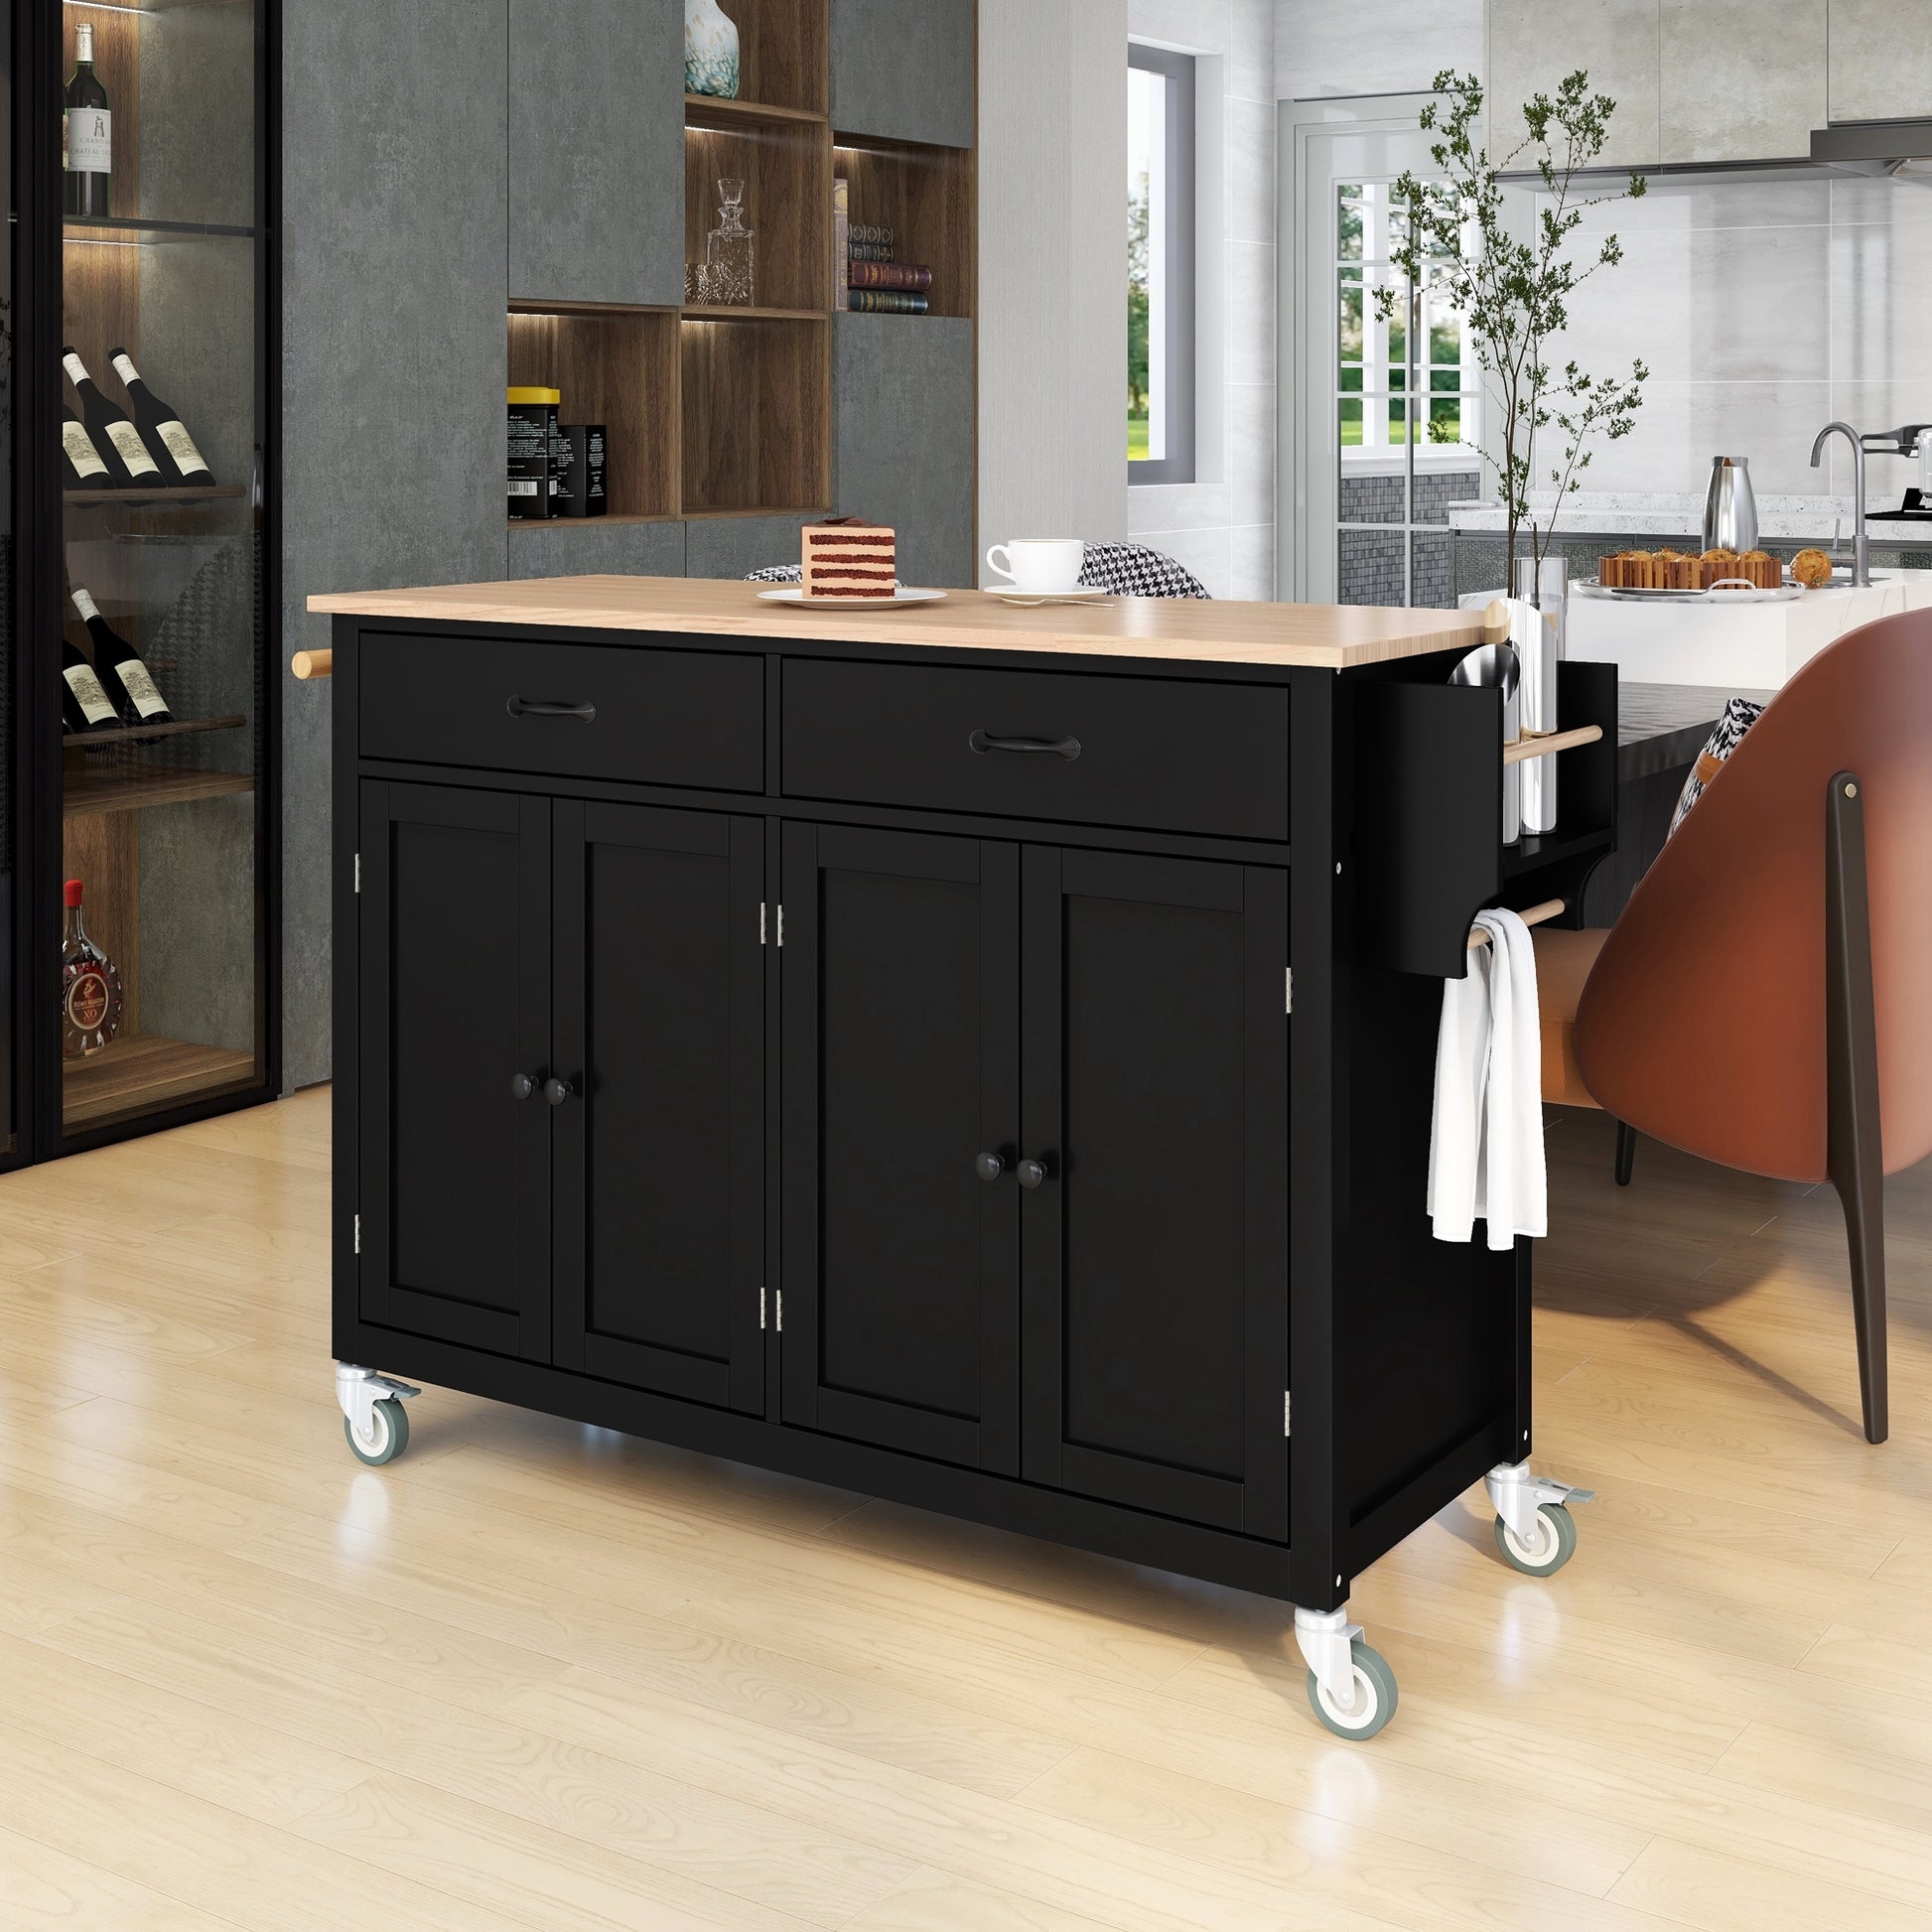 K&K Mobile Kitchen Island Cart with Solid Wood Top- Black